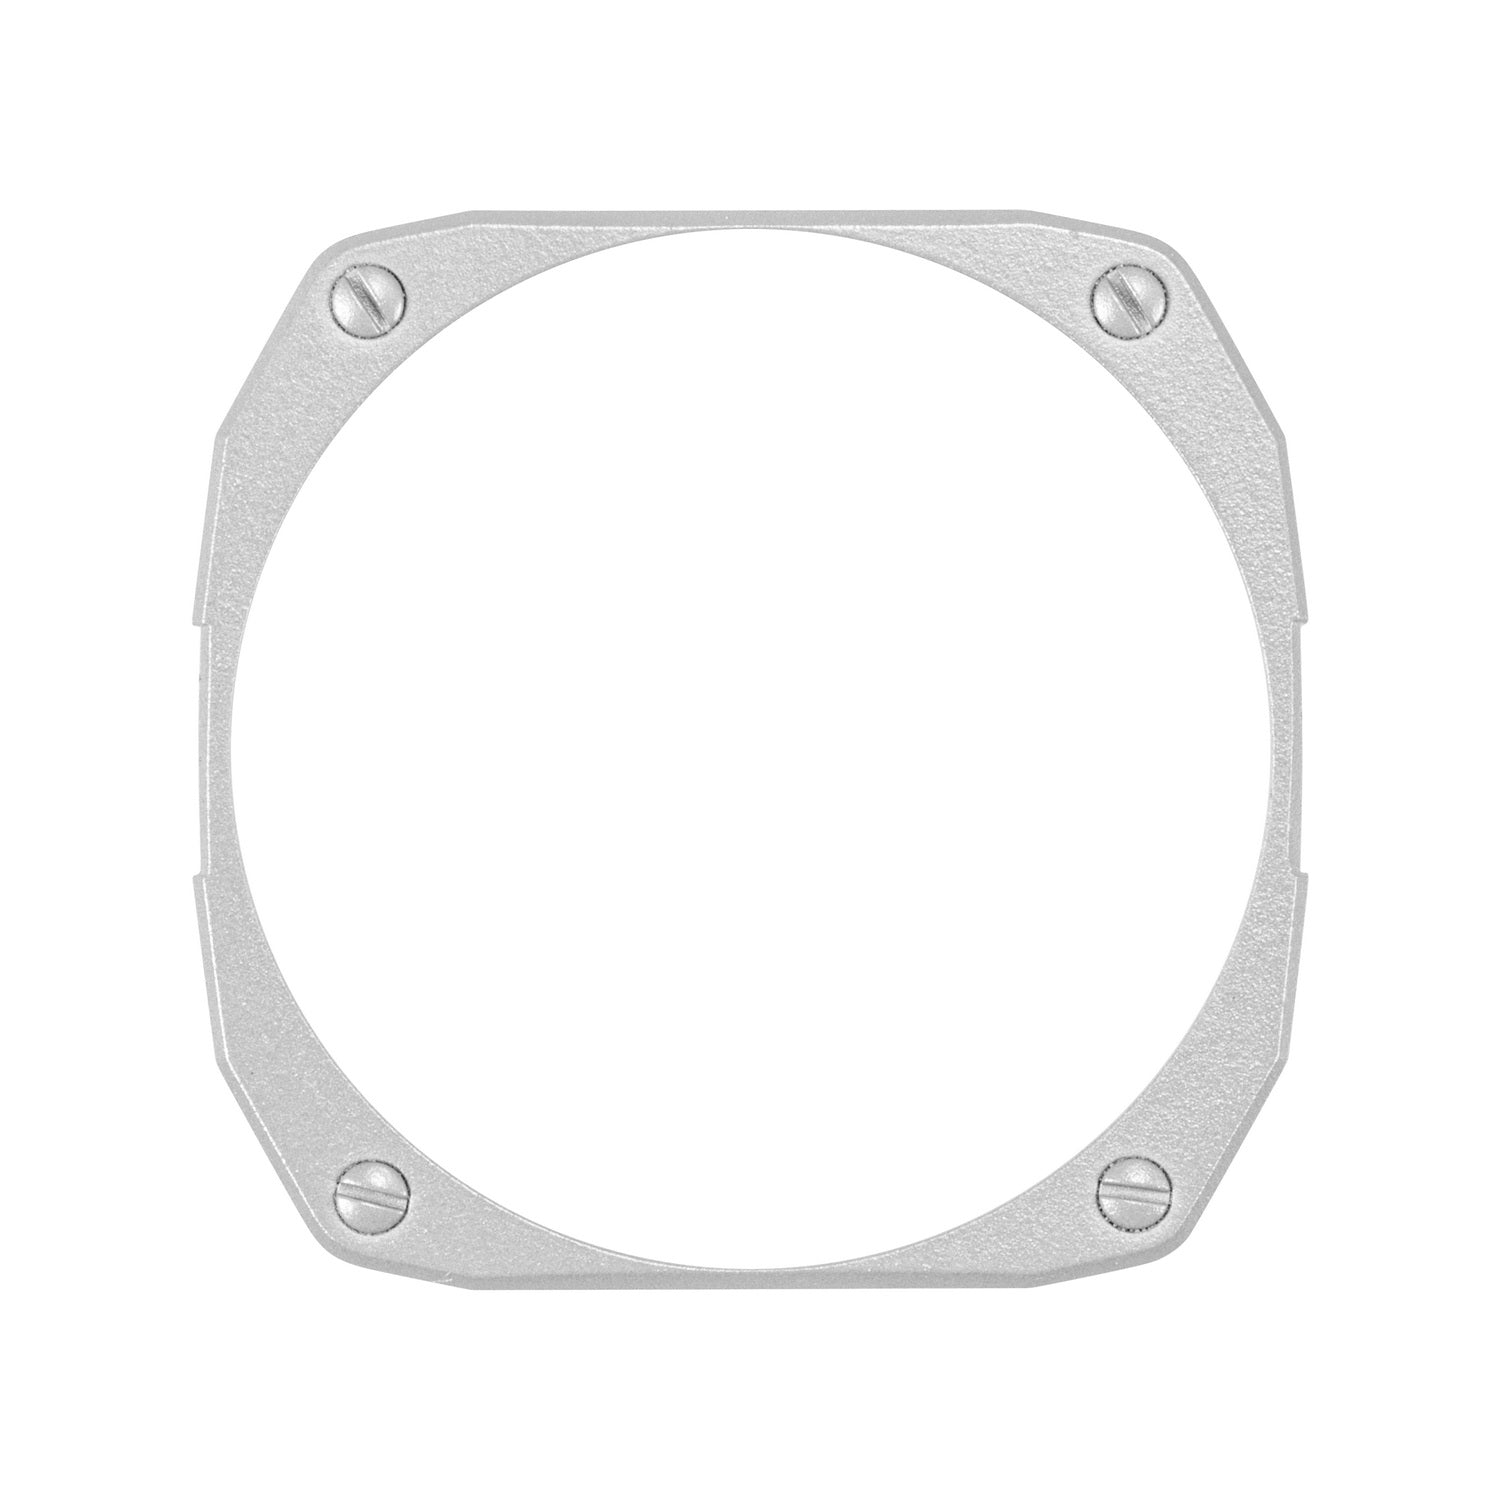 MOD 42 face plate - All White